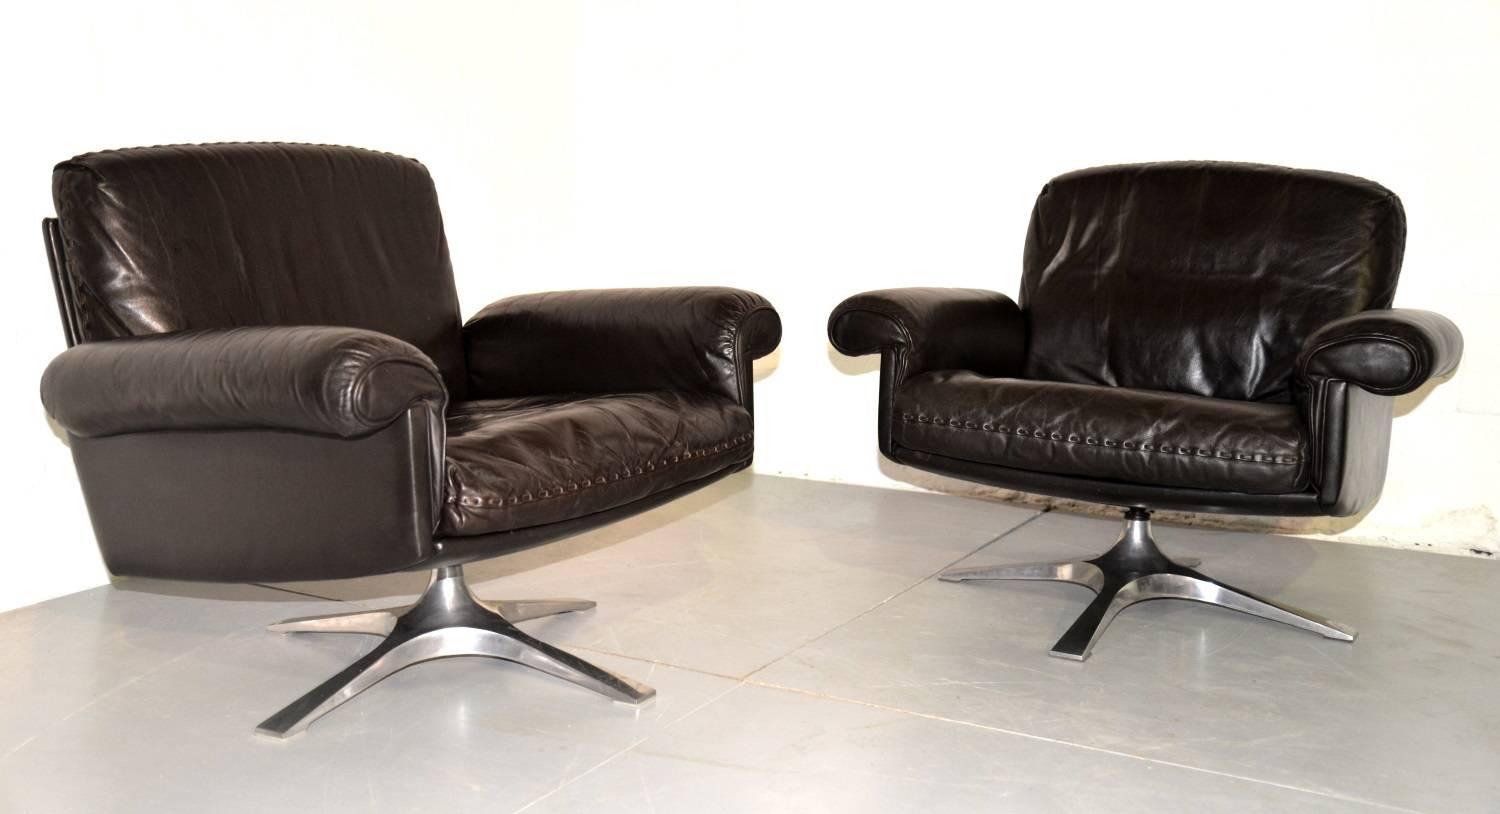 Discounted airfreight for our US and International customers ( from 2 weeks door to door)

We are delighted to bring to you a pair of highly desirable retro De Sede DS-31 swivel lounge club armchairs in beautiful soft leather with whipstitch edge